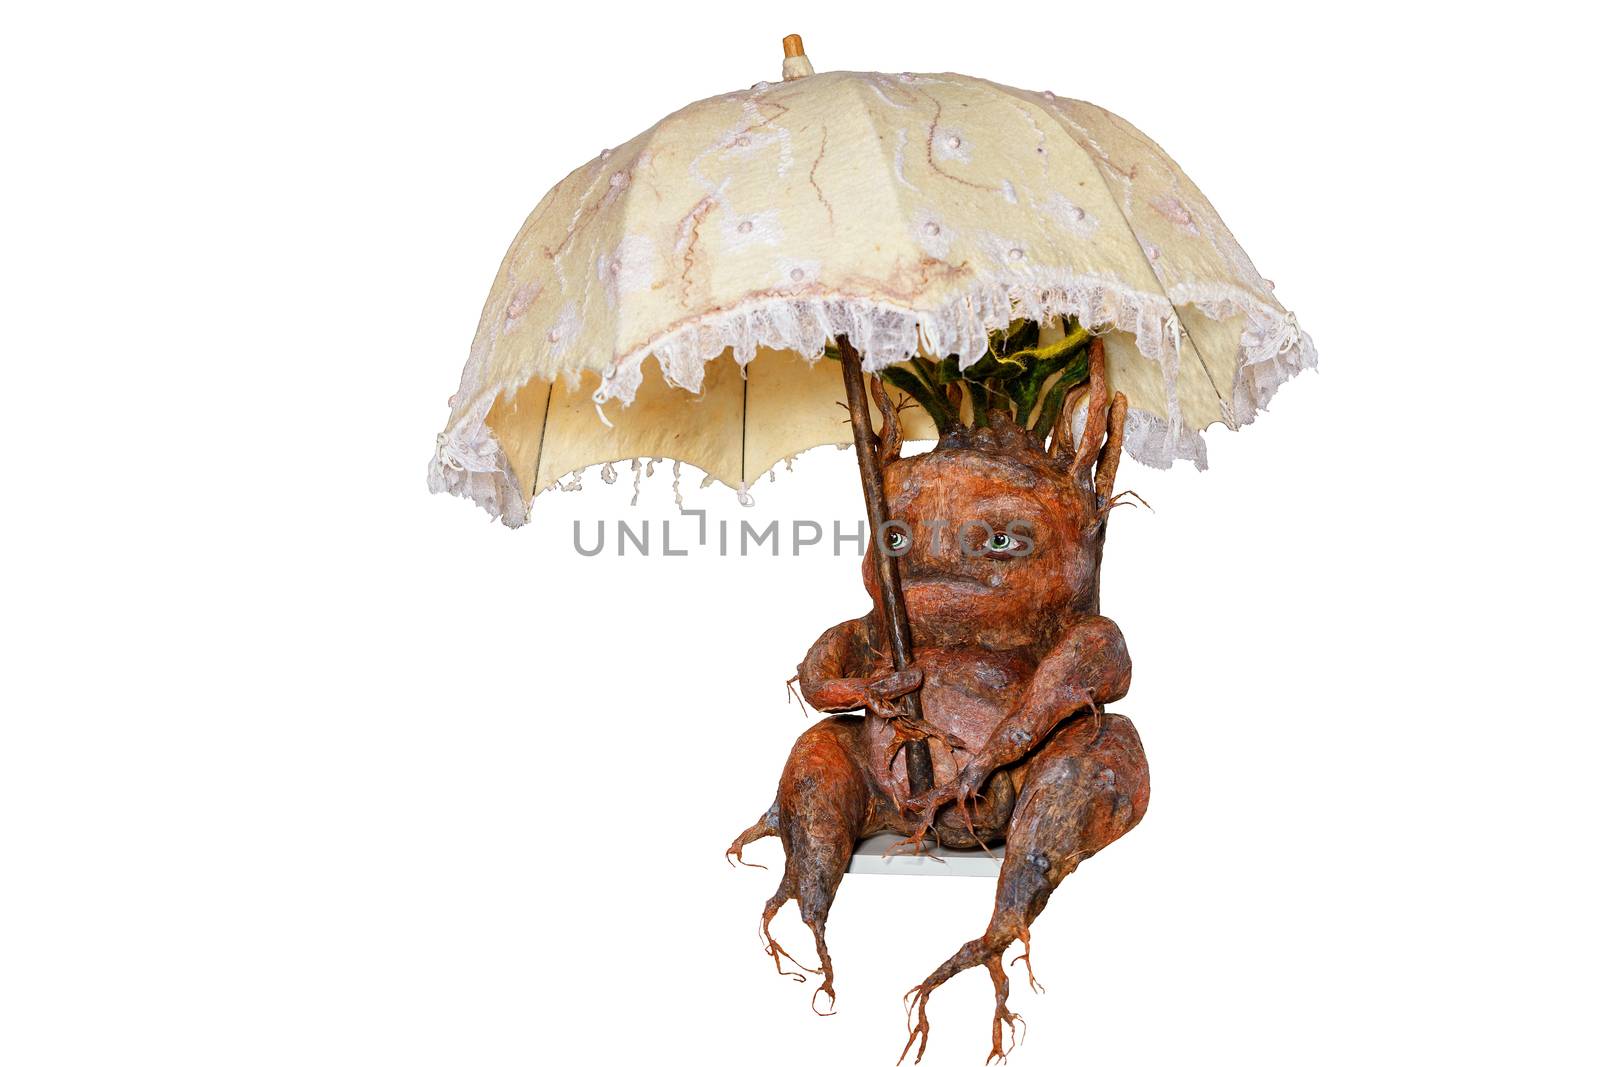 Mandrake root sits hiding under an umbrella, scary, funny, carved from wood. by Sergii